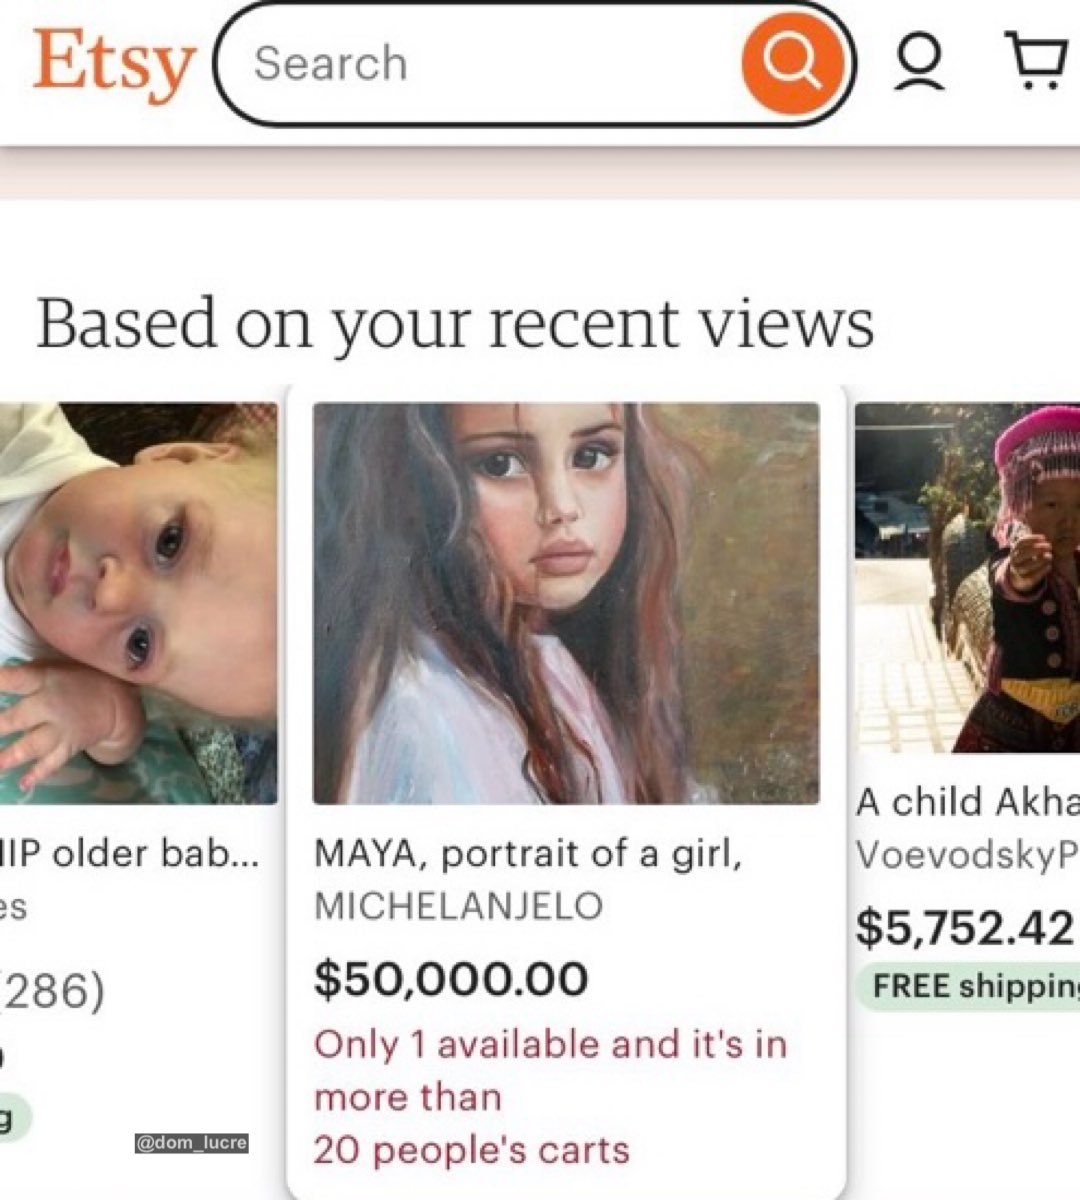 Etsy is currently selling a portrait of this little girl for $50,000.00 and I believe I should investigate why.